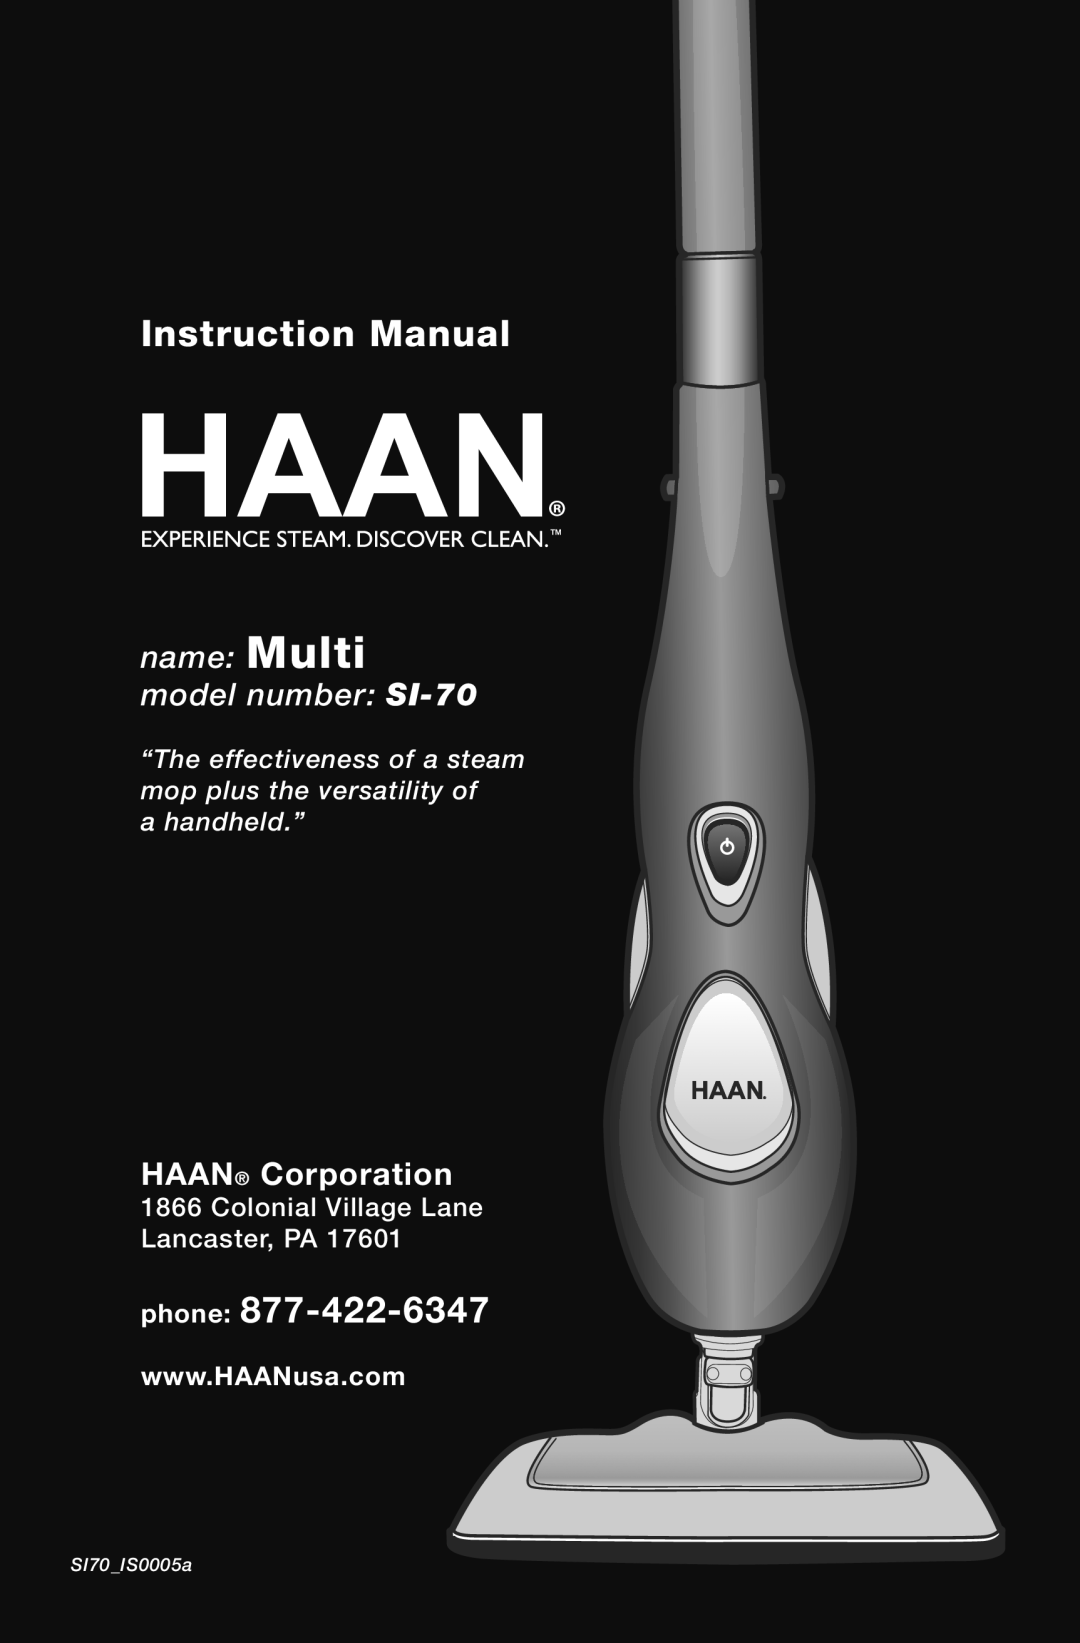 Haan instruction manual phone, HAAN Corporation, name Multi model number SI-70, a handheld.”, SI70 IS0005a 